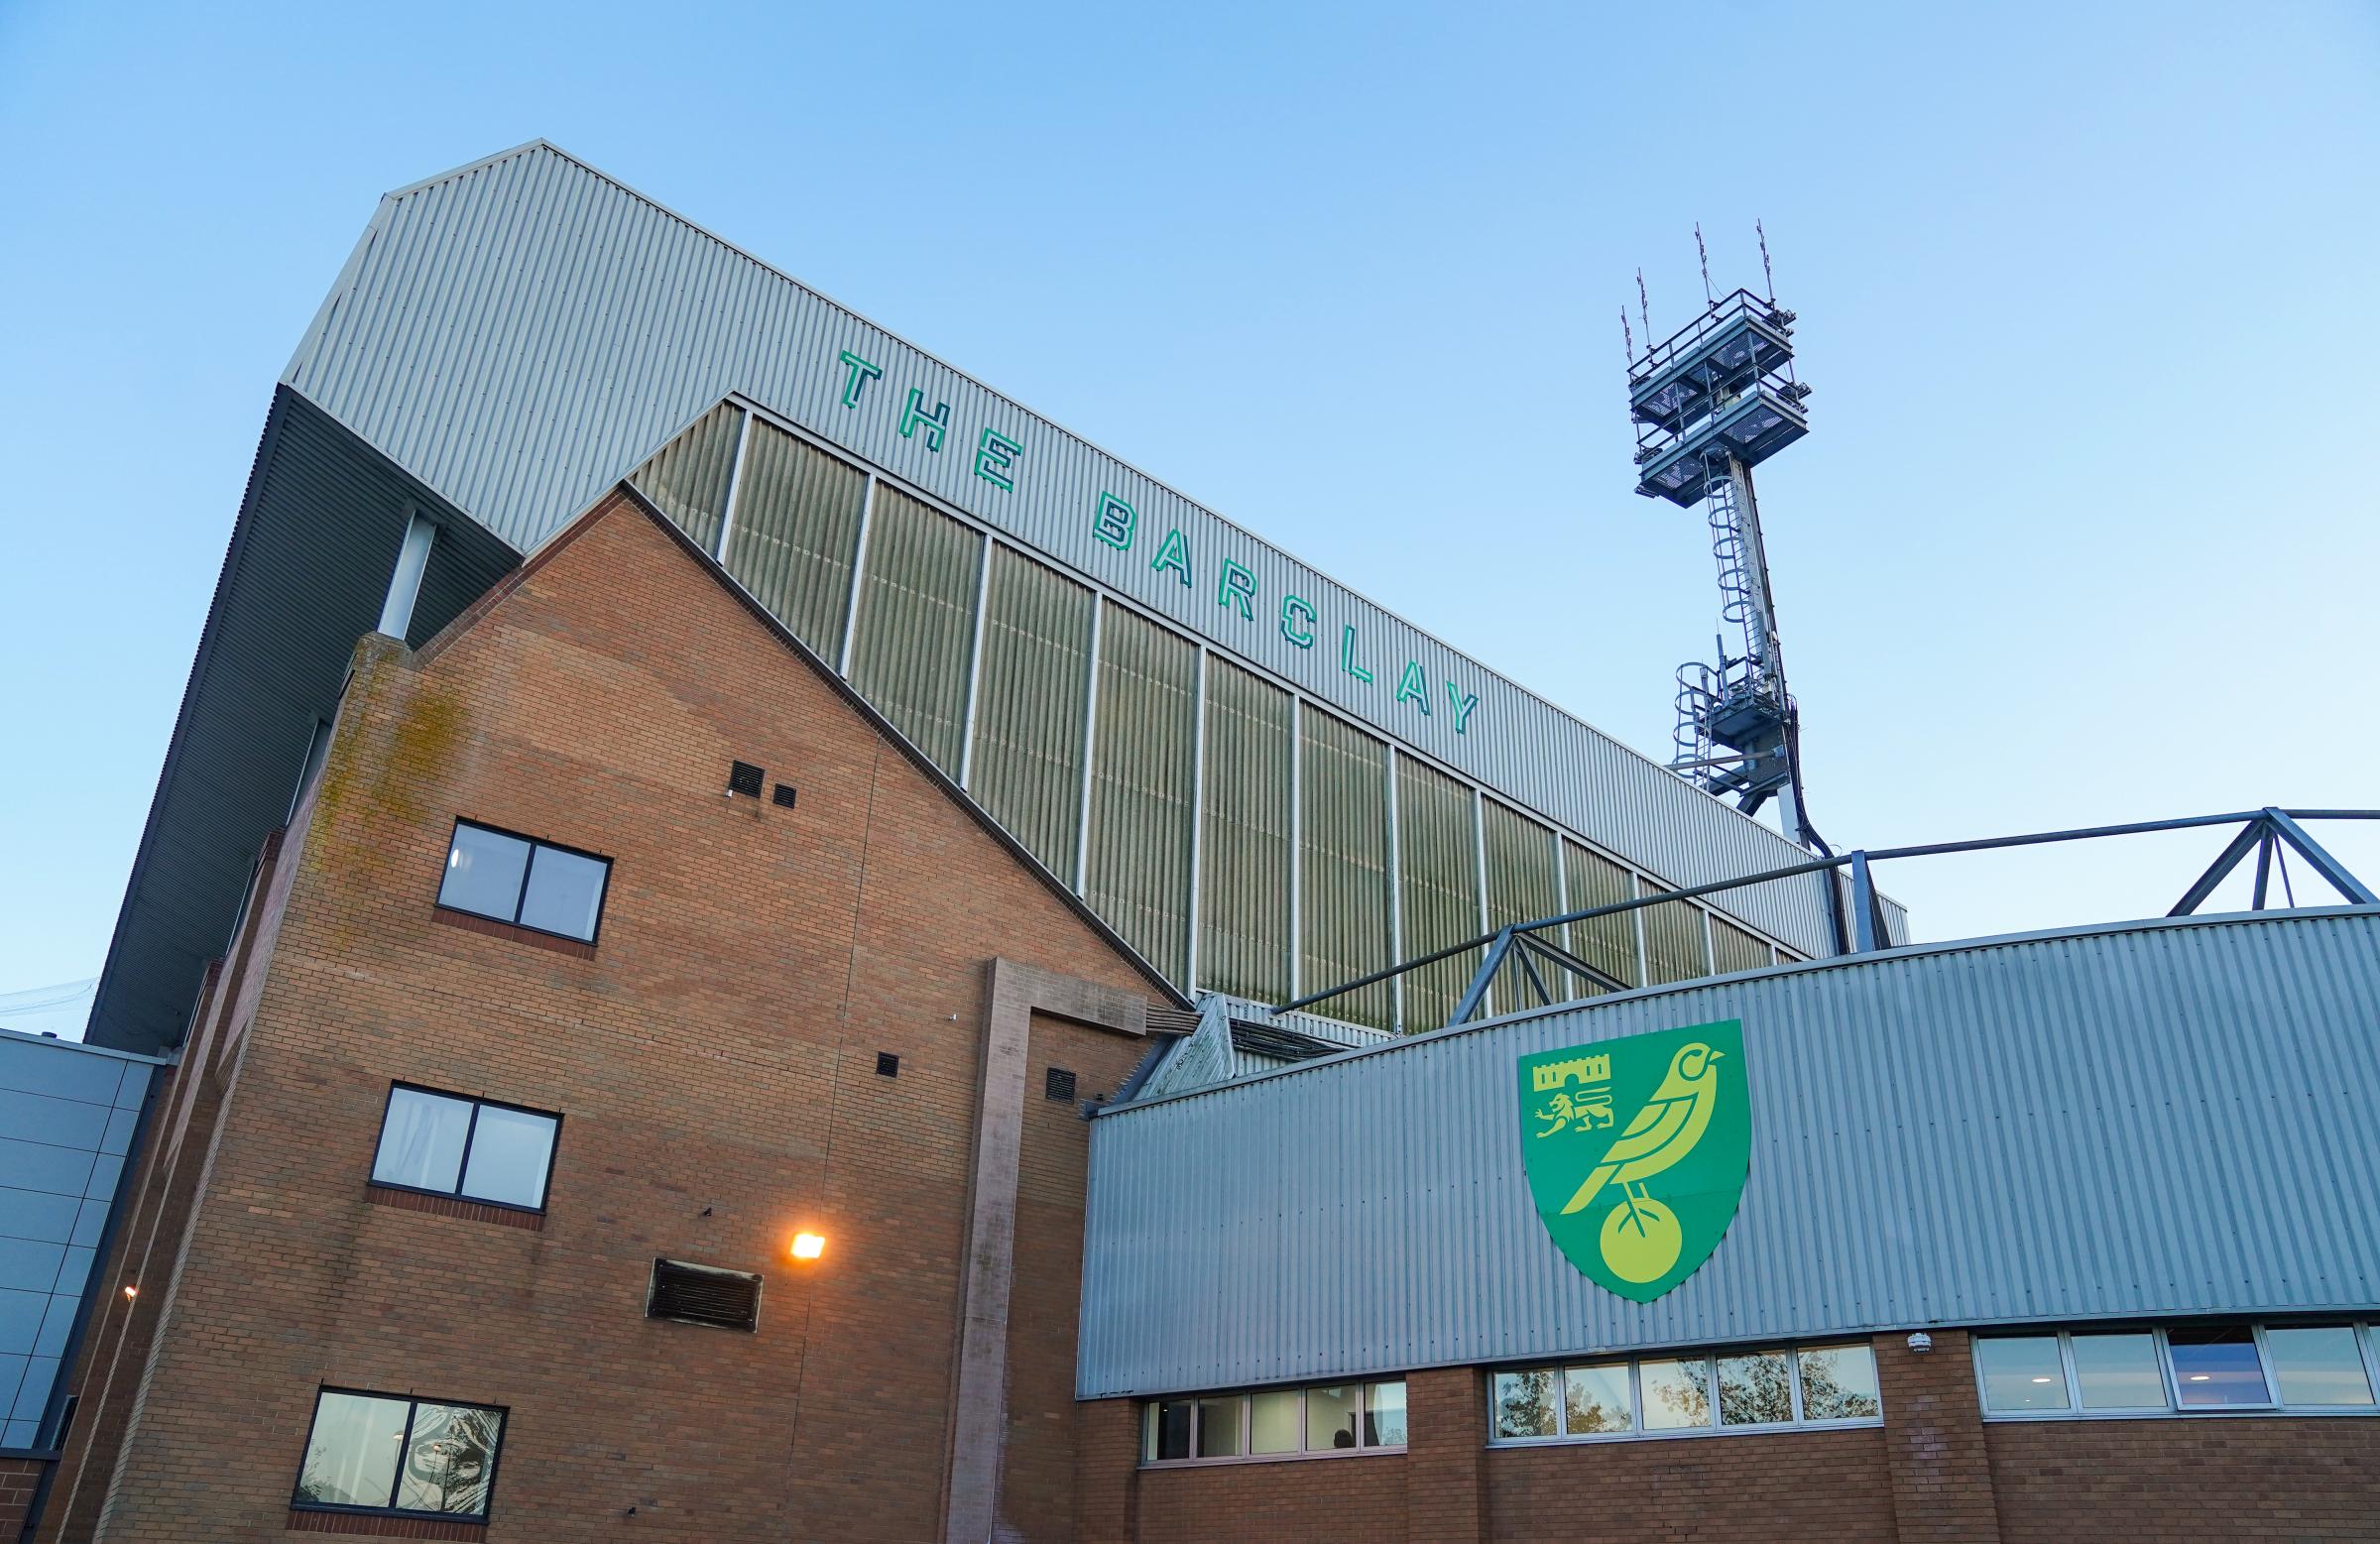 Norwich City v Burnley: How to watch on TV, live stream